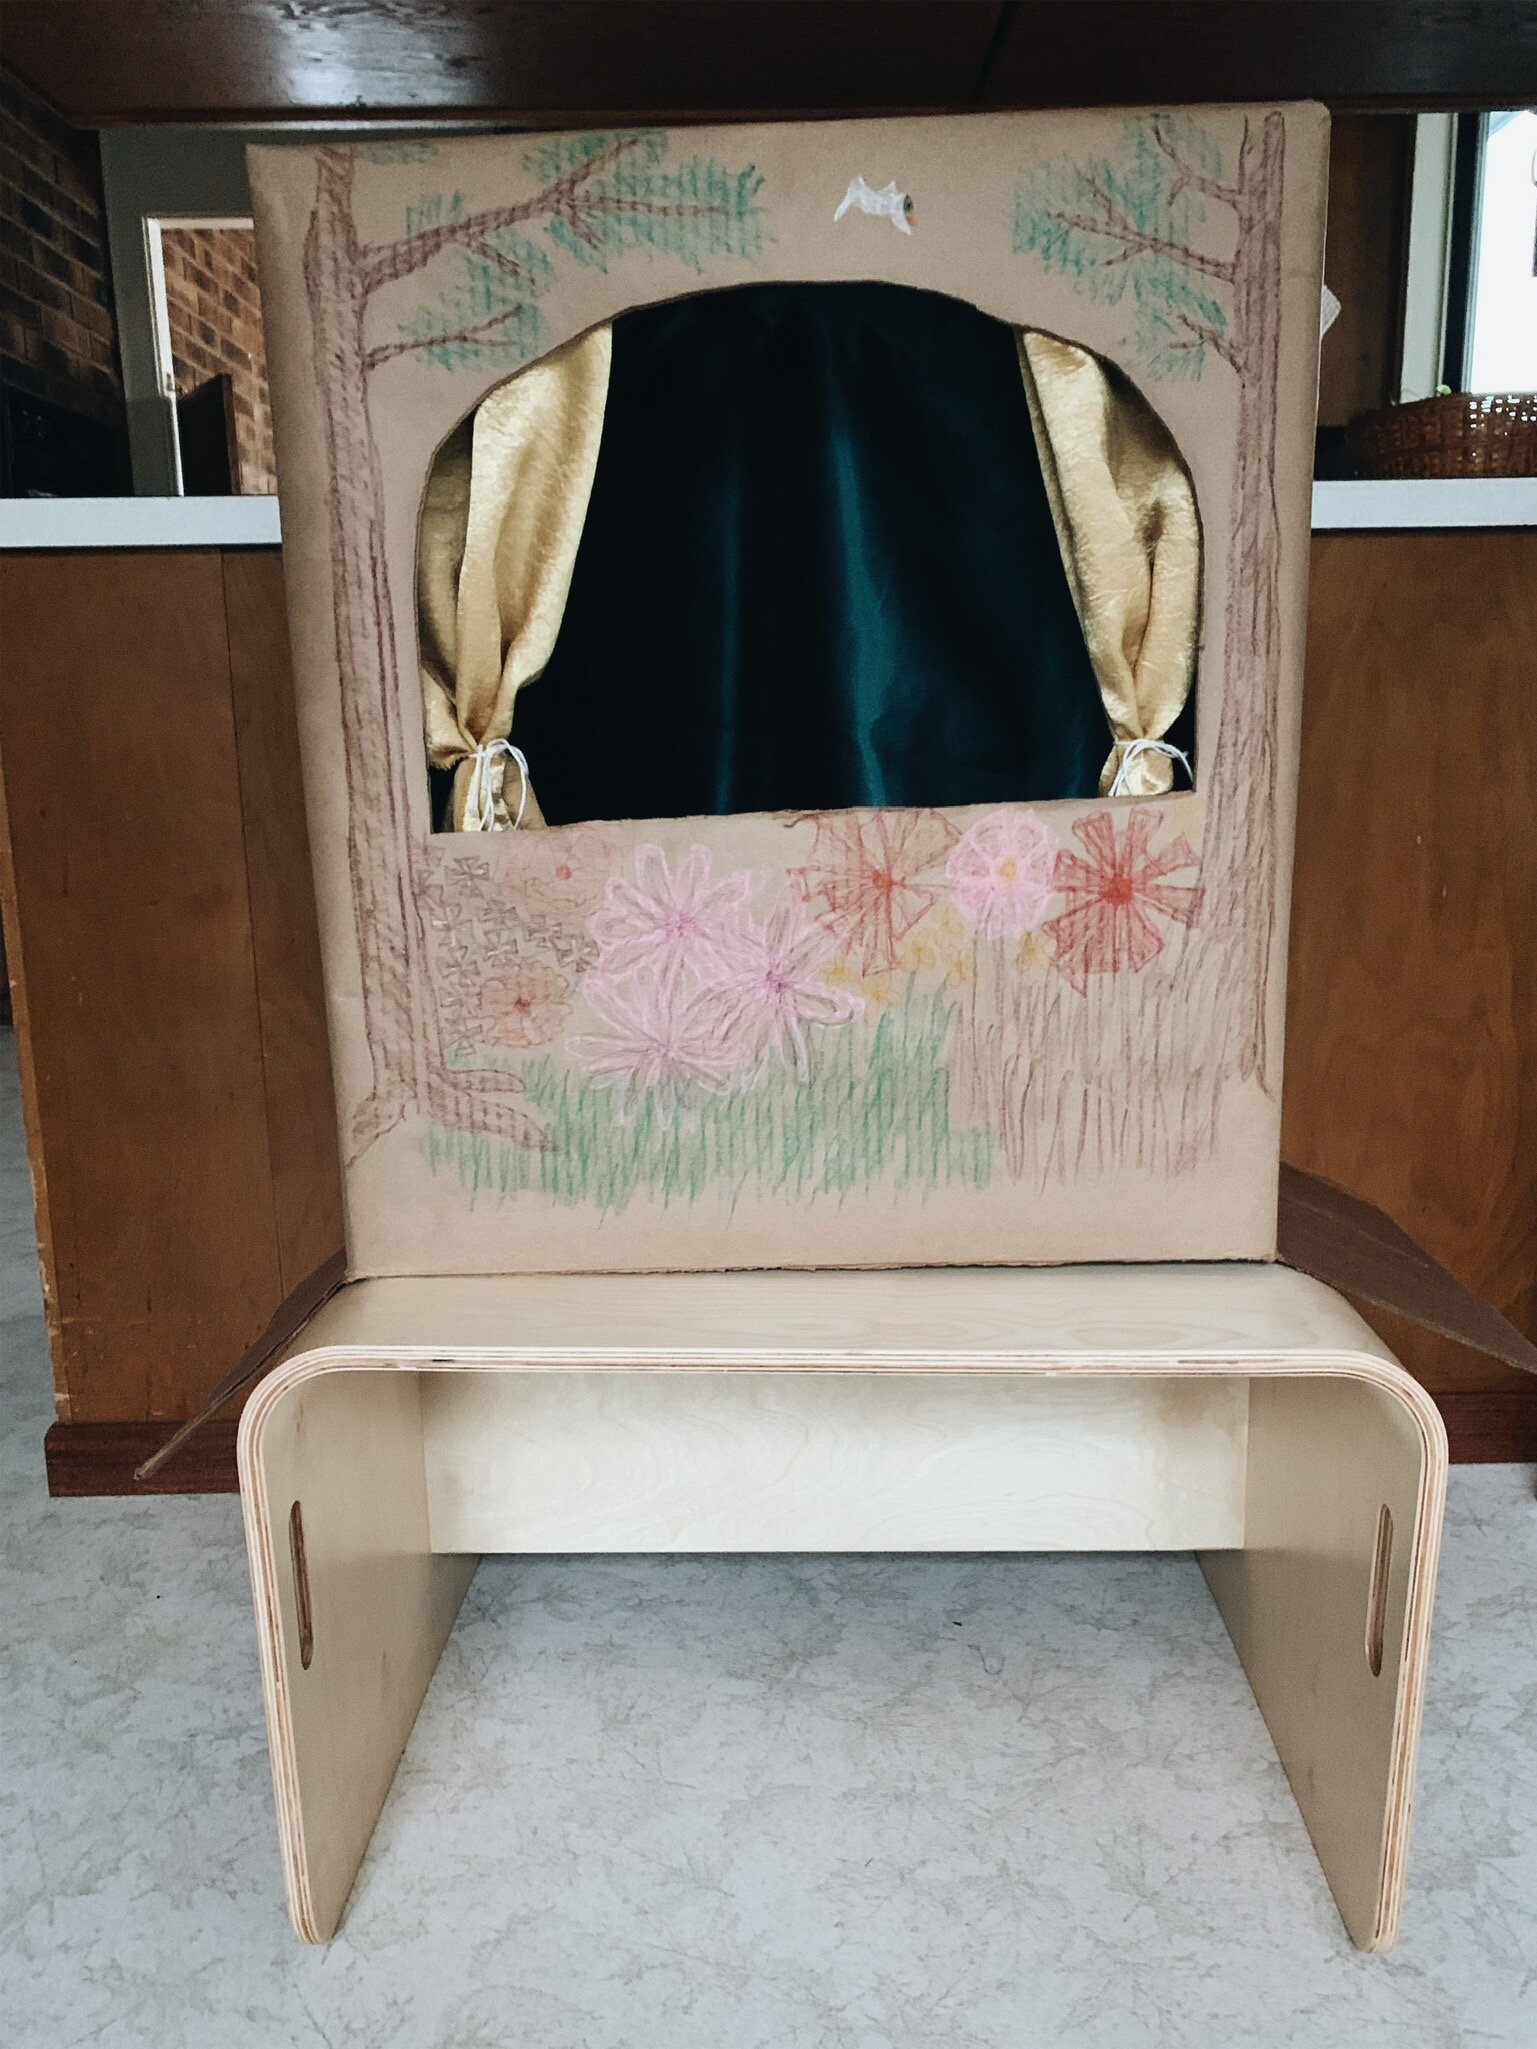  We made you a puppet theater. Main star was Nunny of course, topic was usually potty training… 